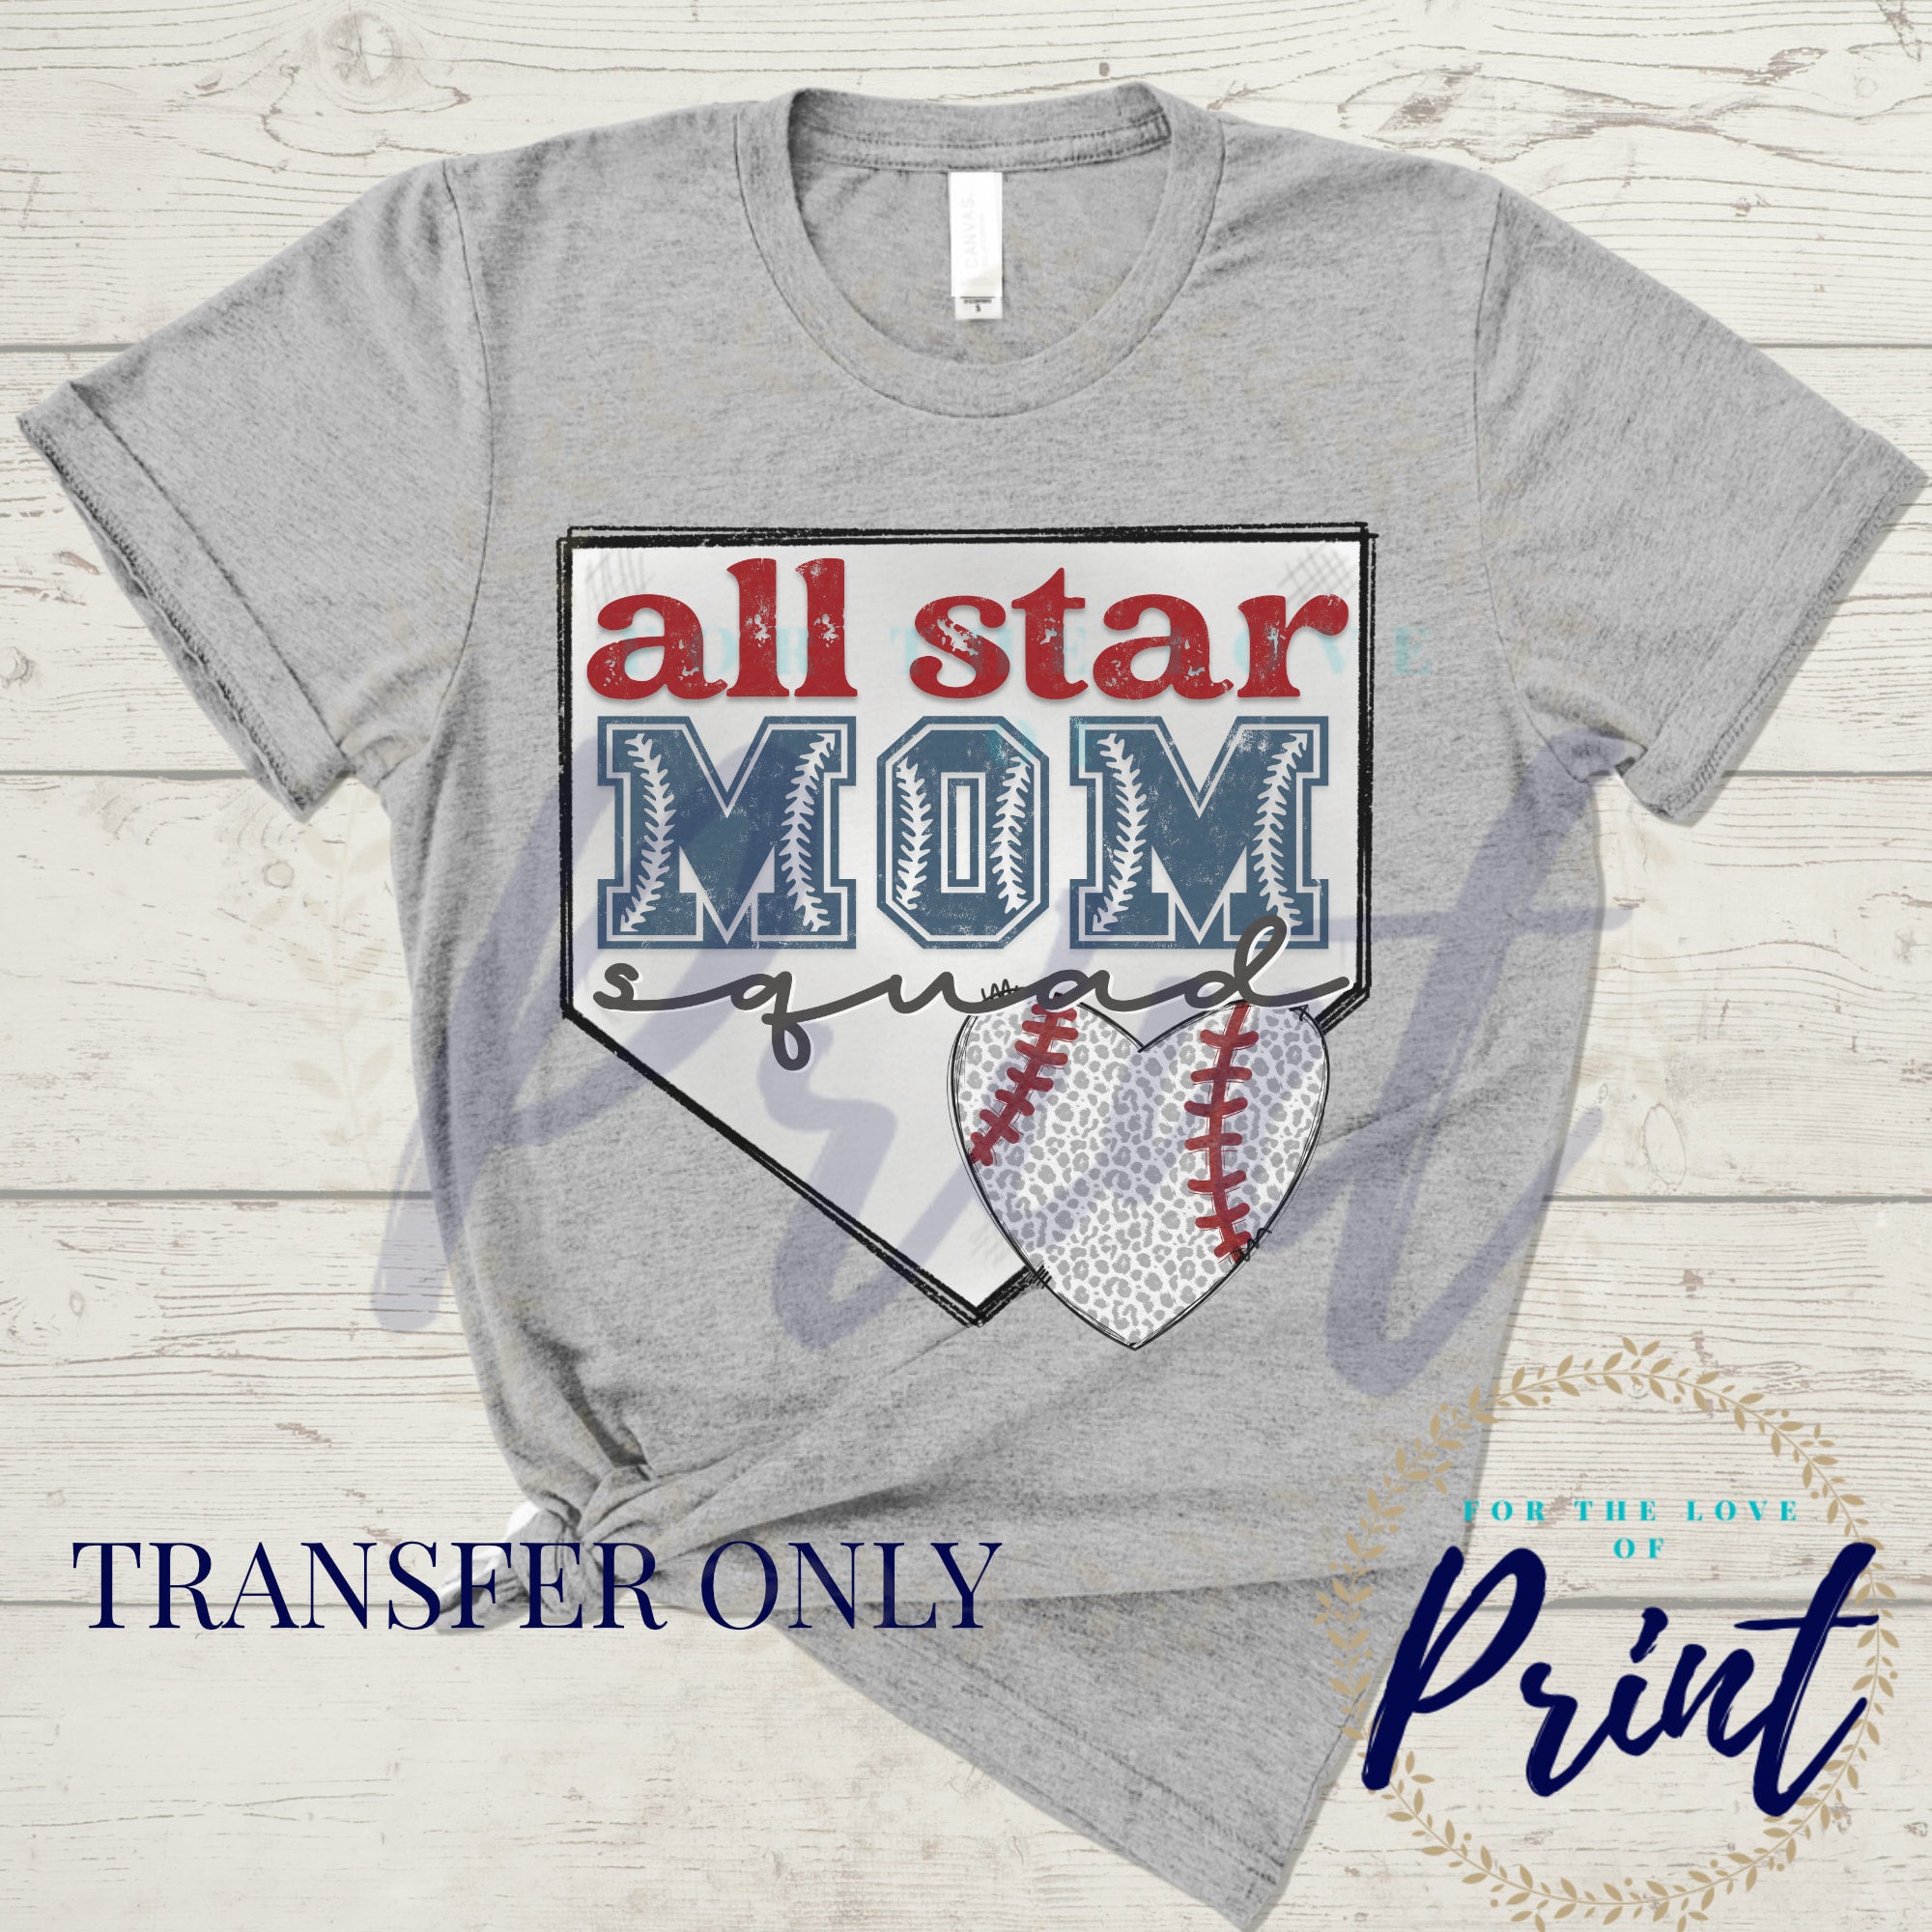 Mother's Day Gift Baseball Mom Shirt - Ink In Action